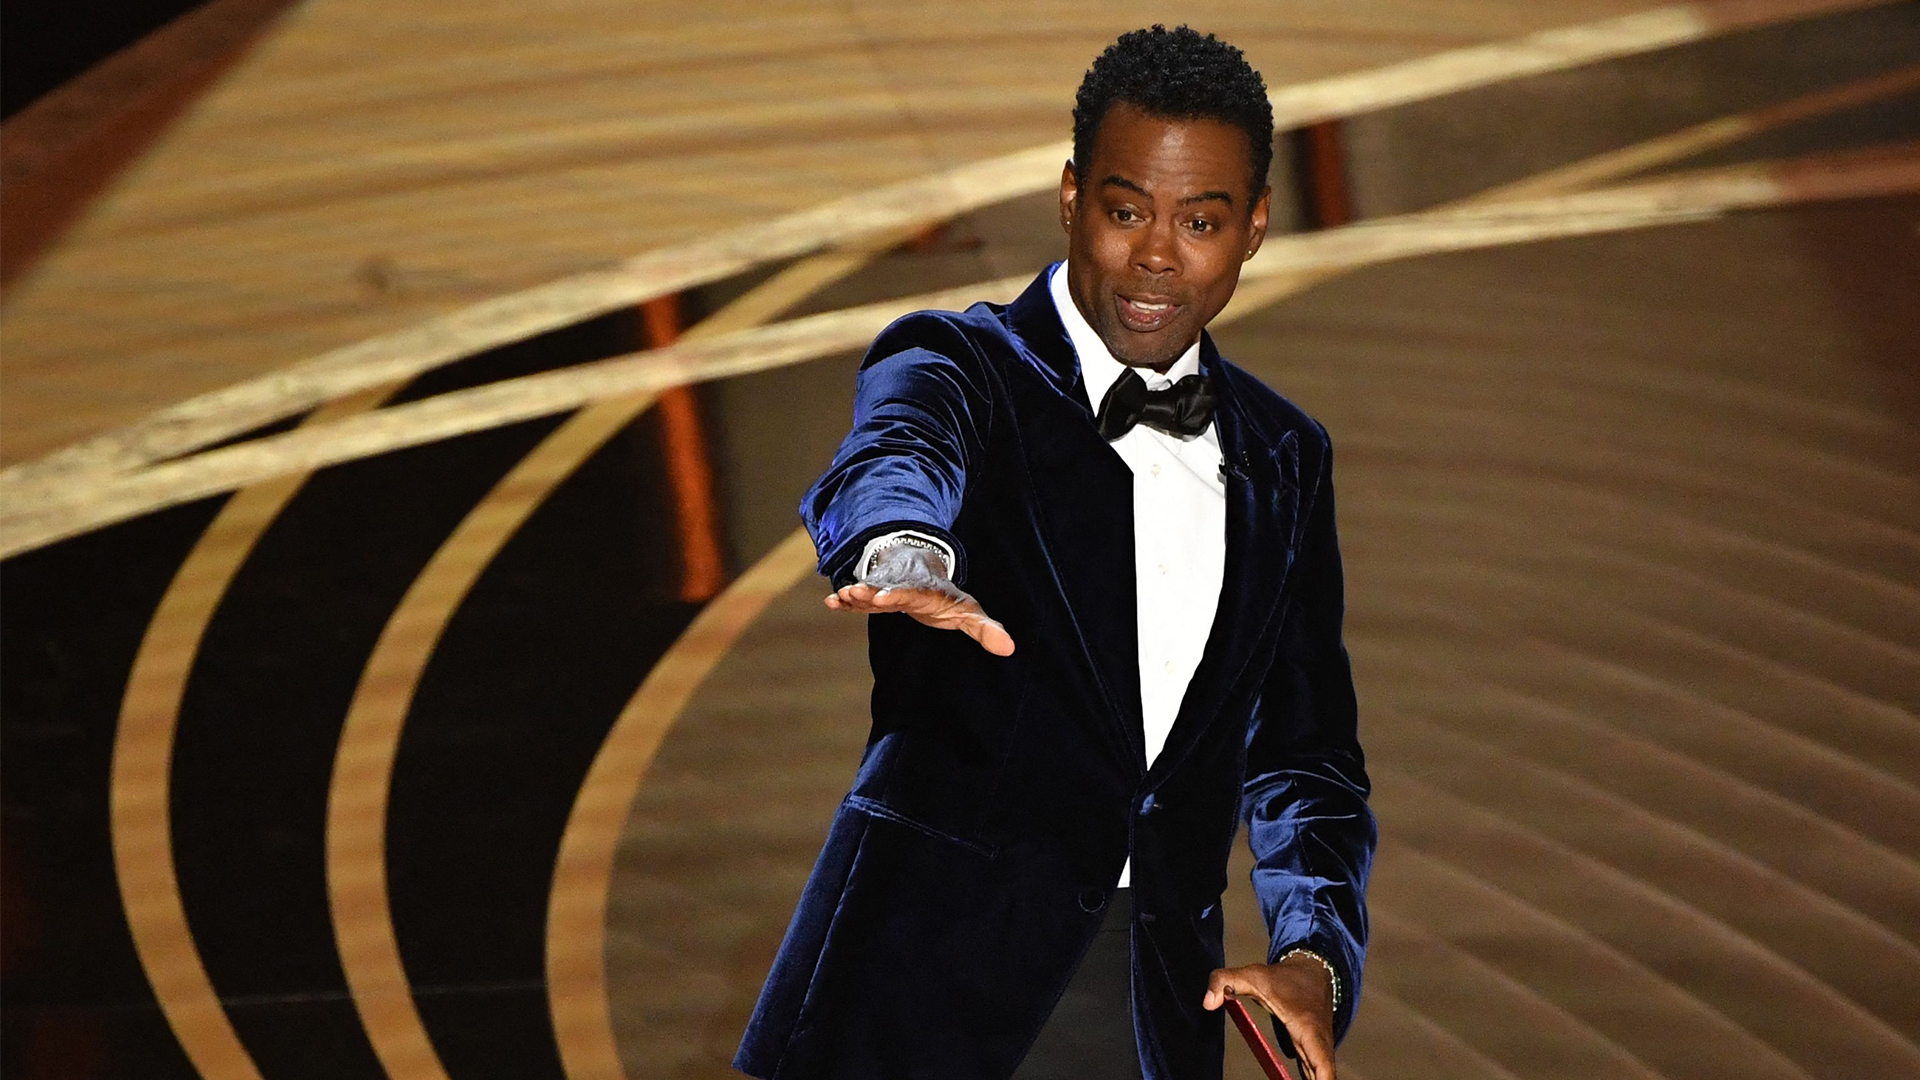 Chris Rock's Upcoming Tour Ticket Sales Spike, Cheapest Ticket Reportedly Jumped From $46 To $411